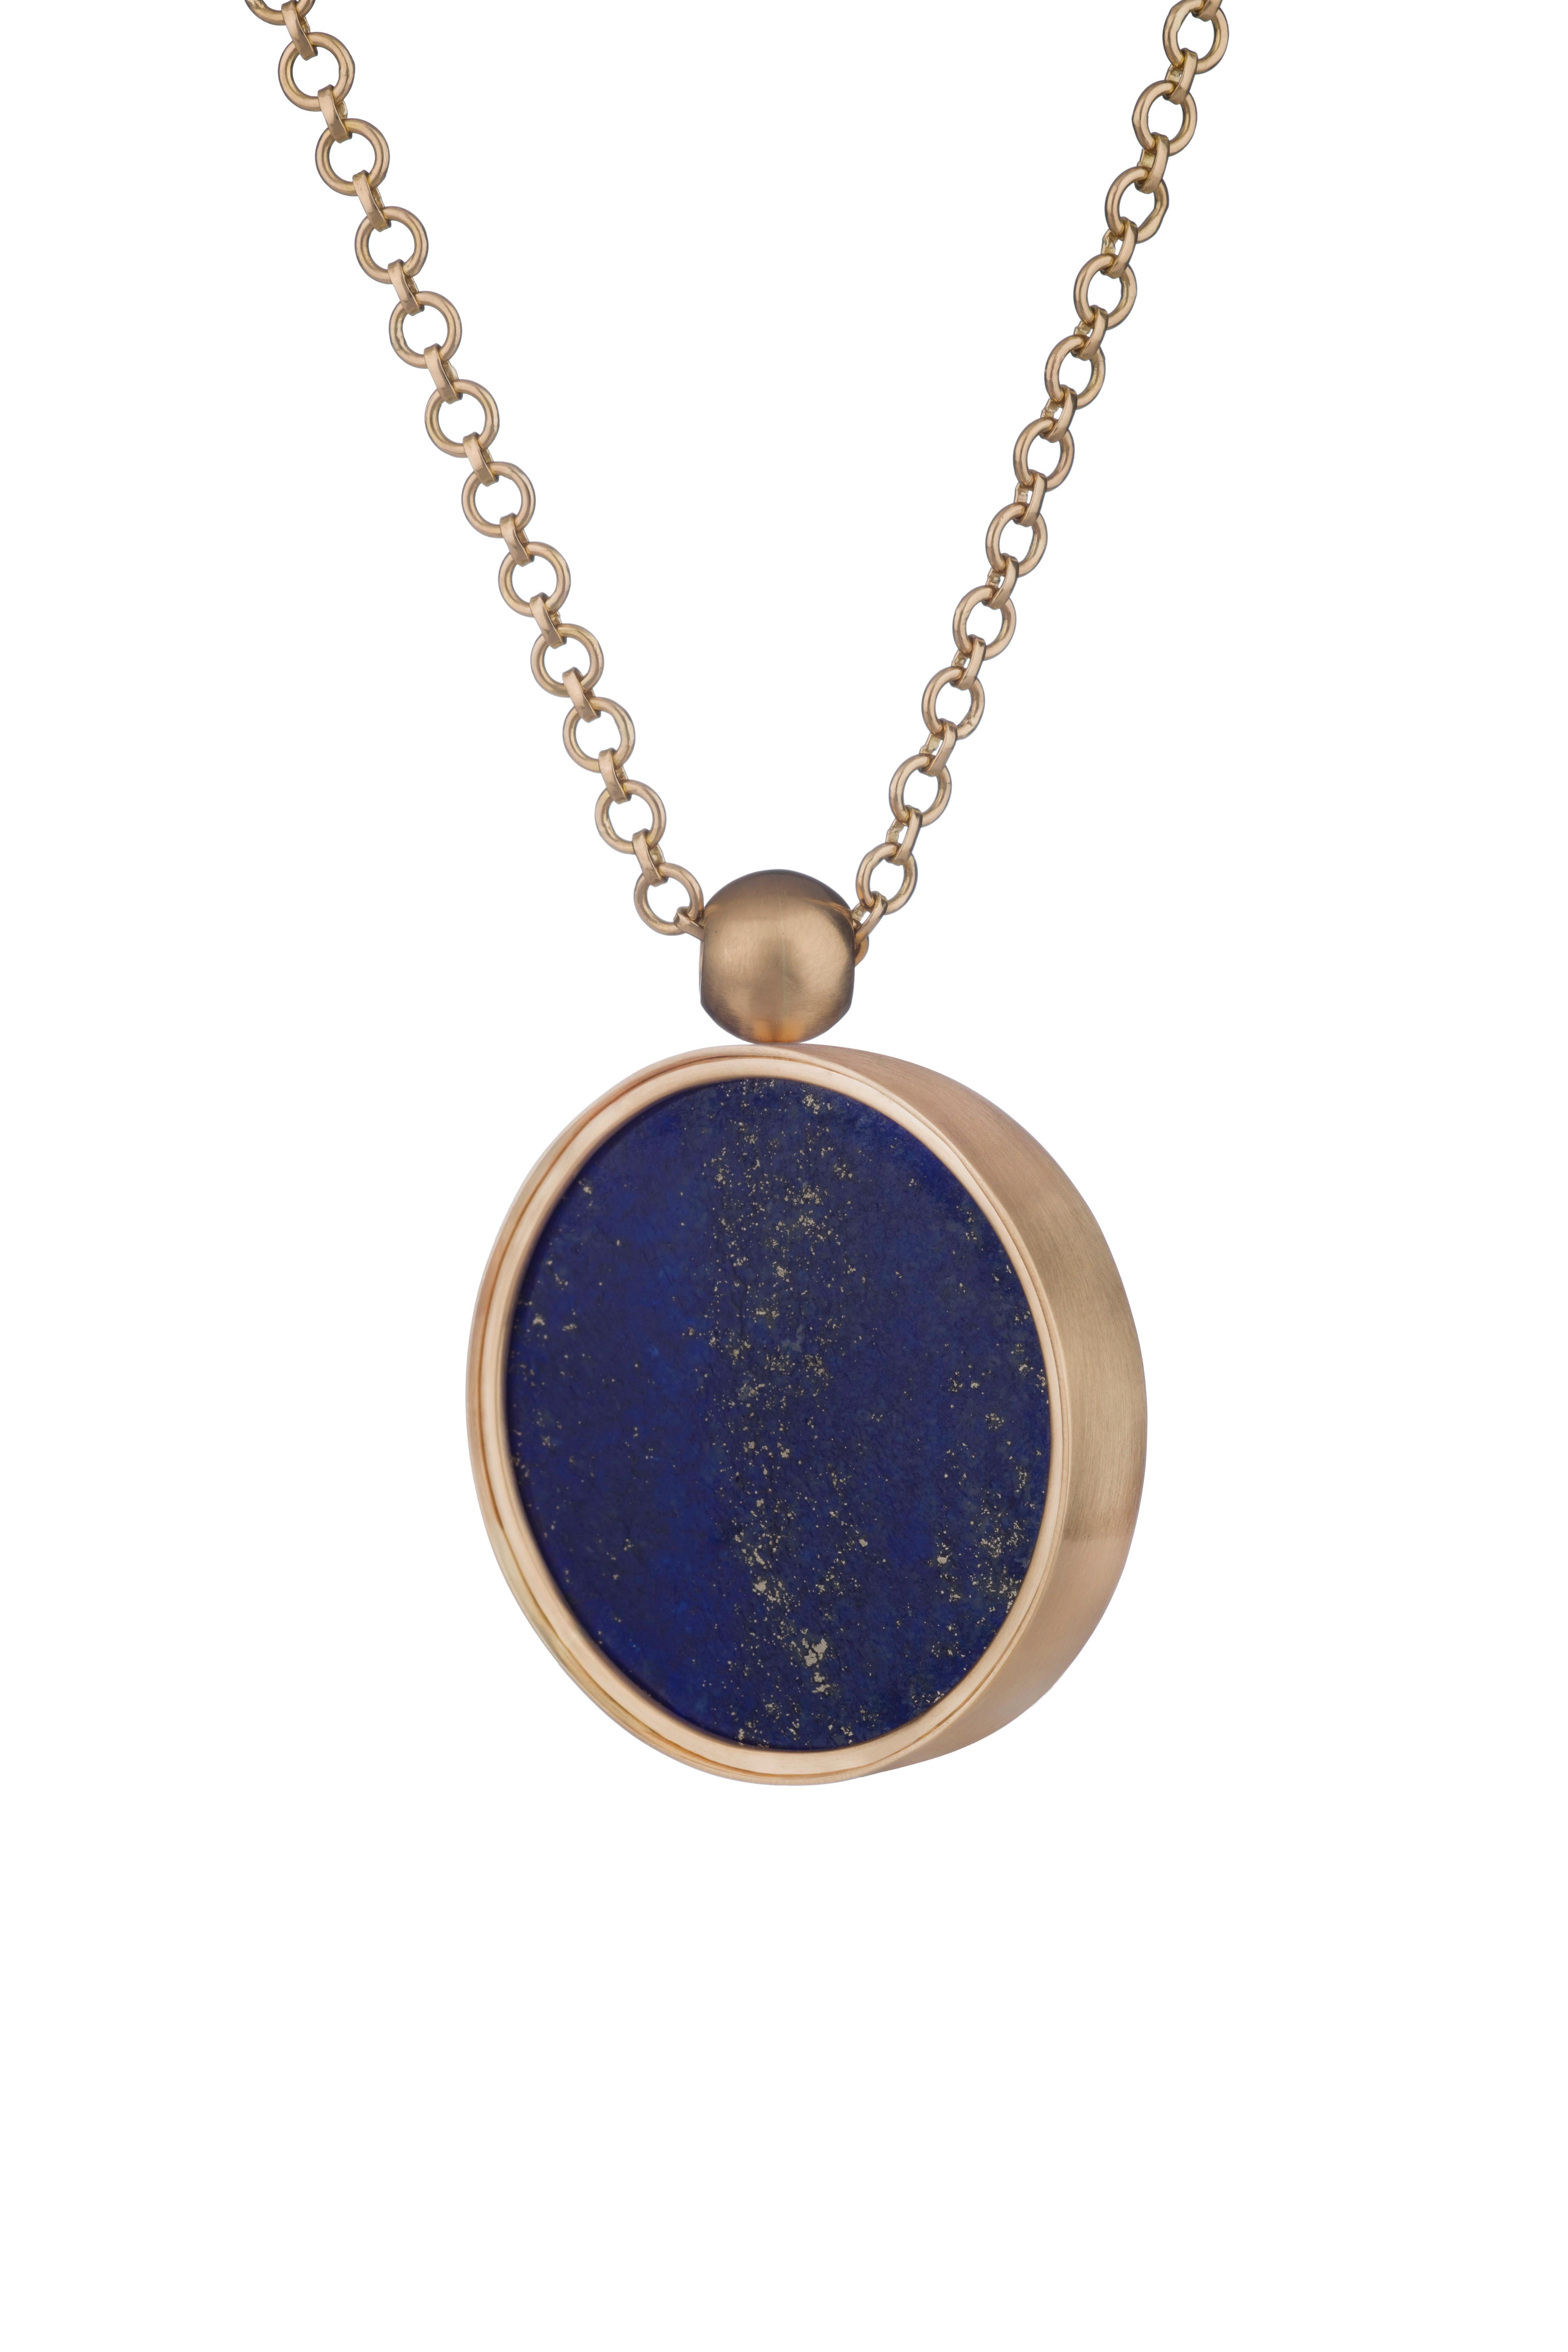 WHISTLER'S MILKY WAY SUN

Ouroboros lapis lazuli sun swivel pendant set in 18 karat gold on a handmade 18 karat gold chain, with an 18 karat gold Ouroboros lasered ball to finish the back. There is a black rhodium plated silver chain option. 

This